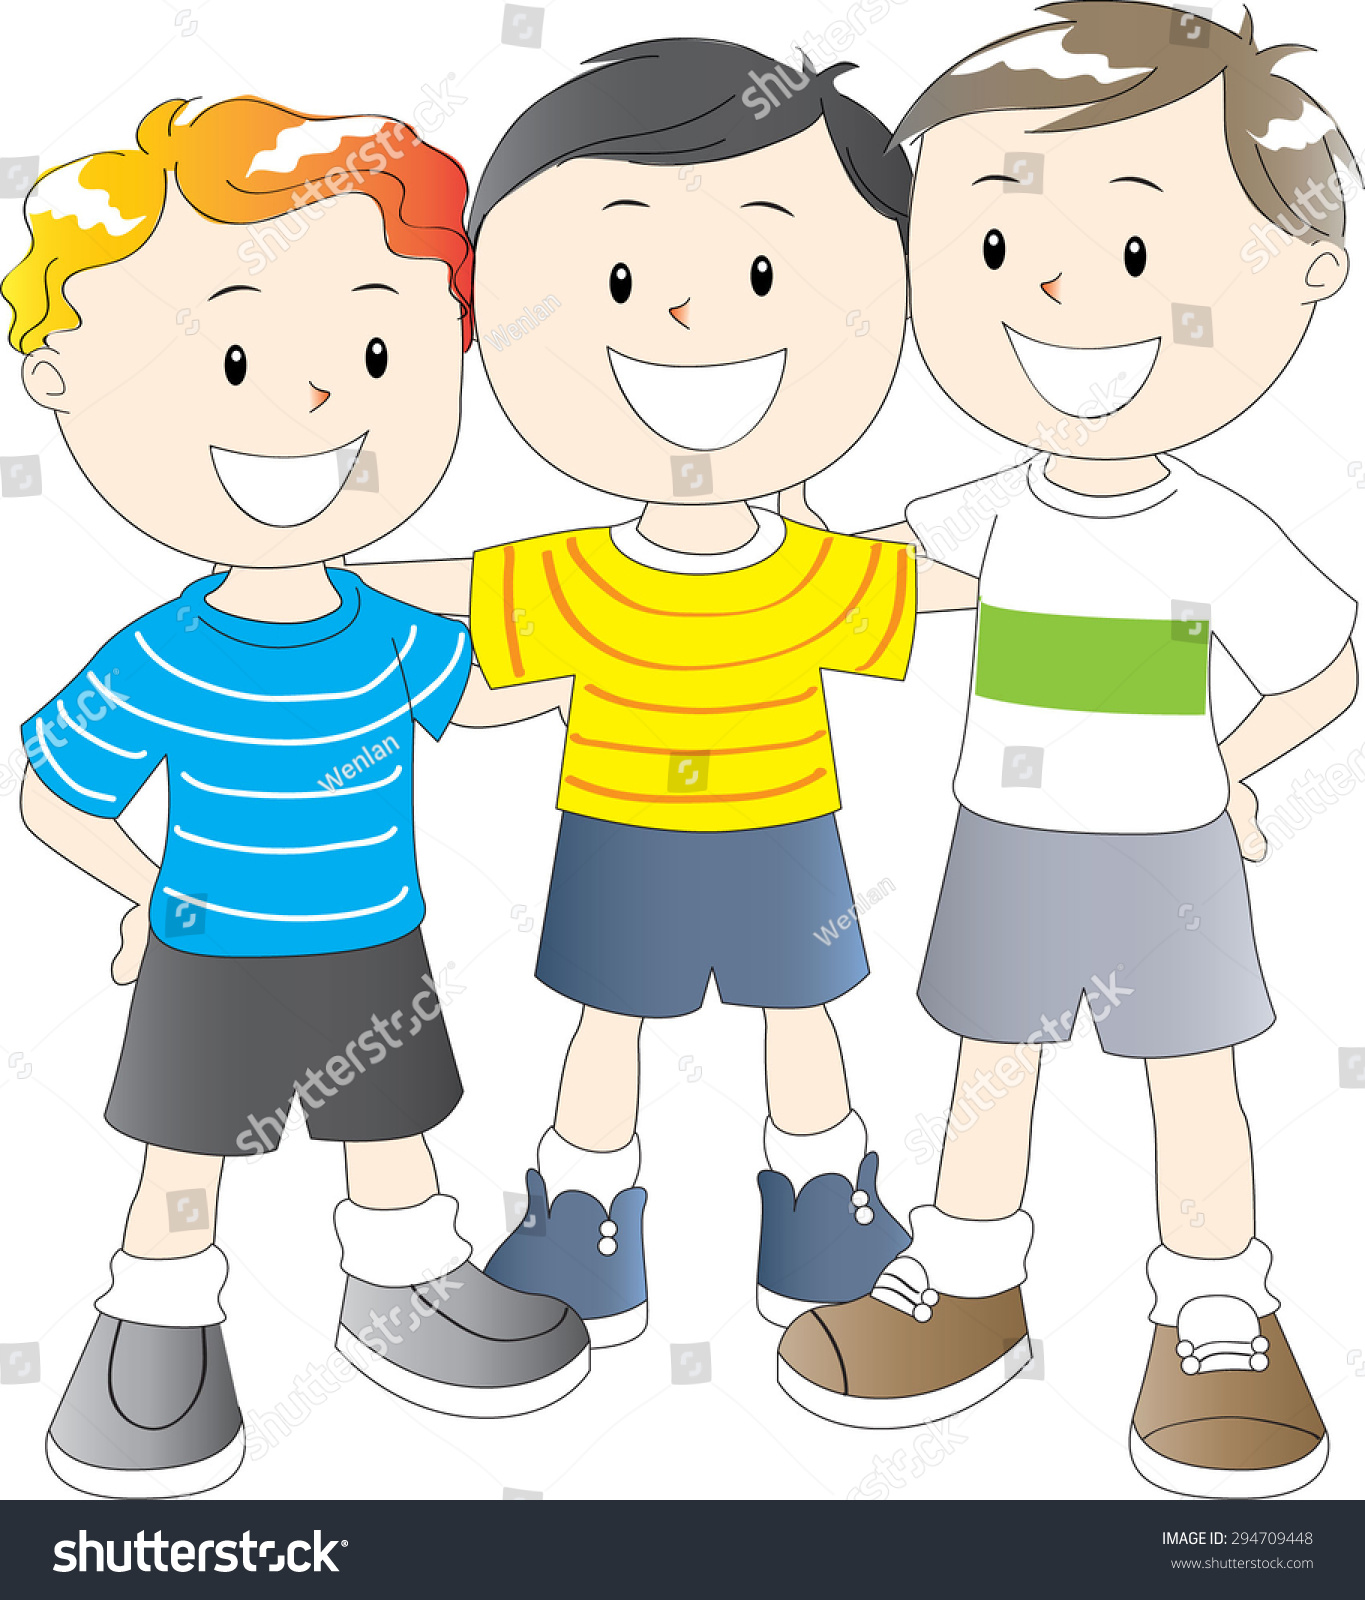 Three Boys Together Stock Vector 294709448 - Shutterstock